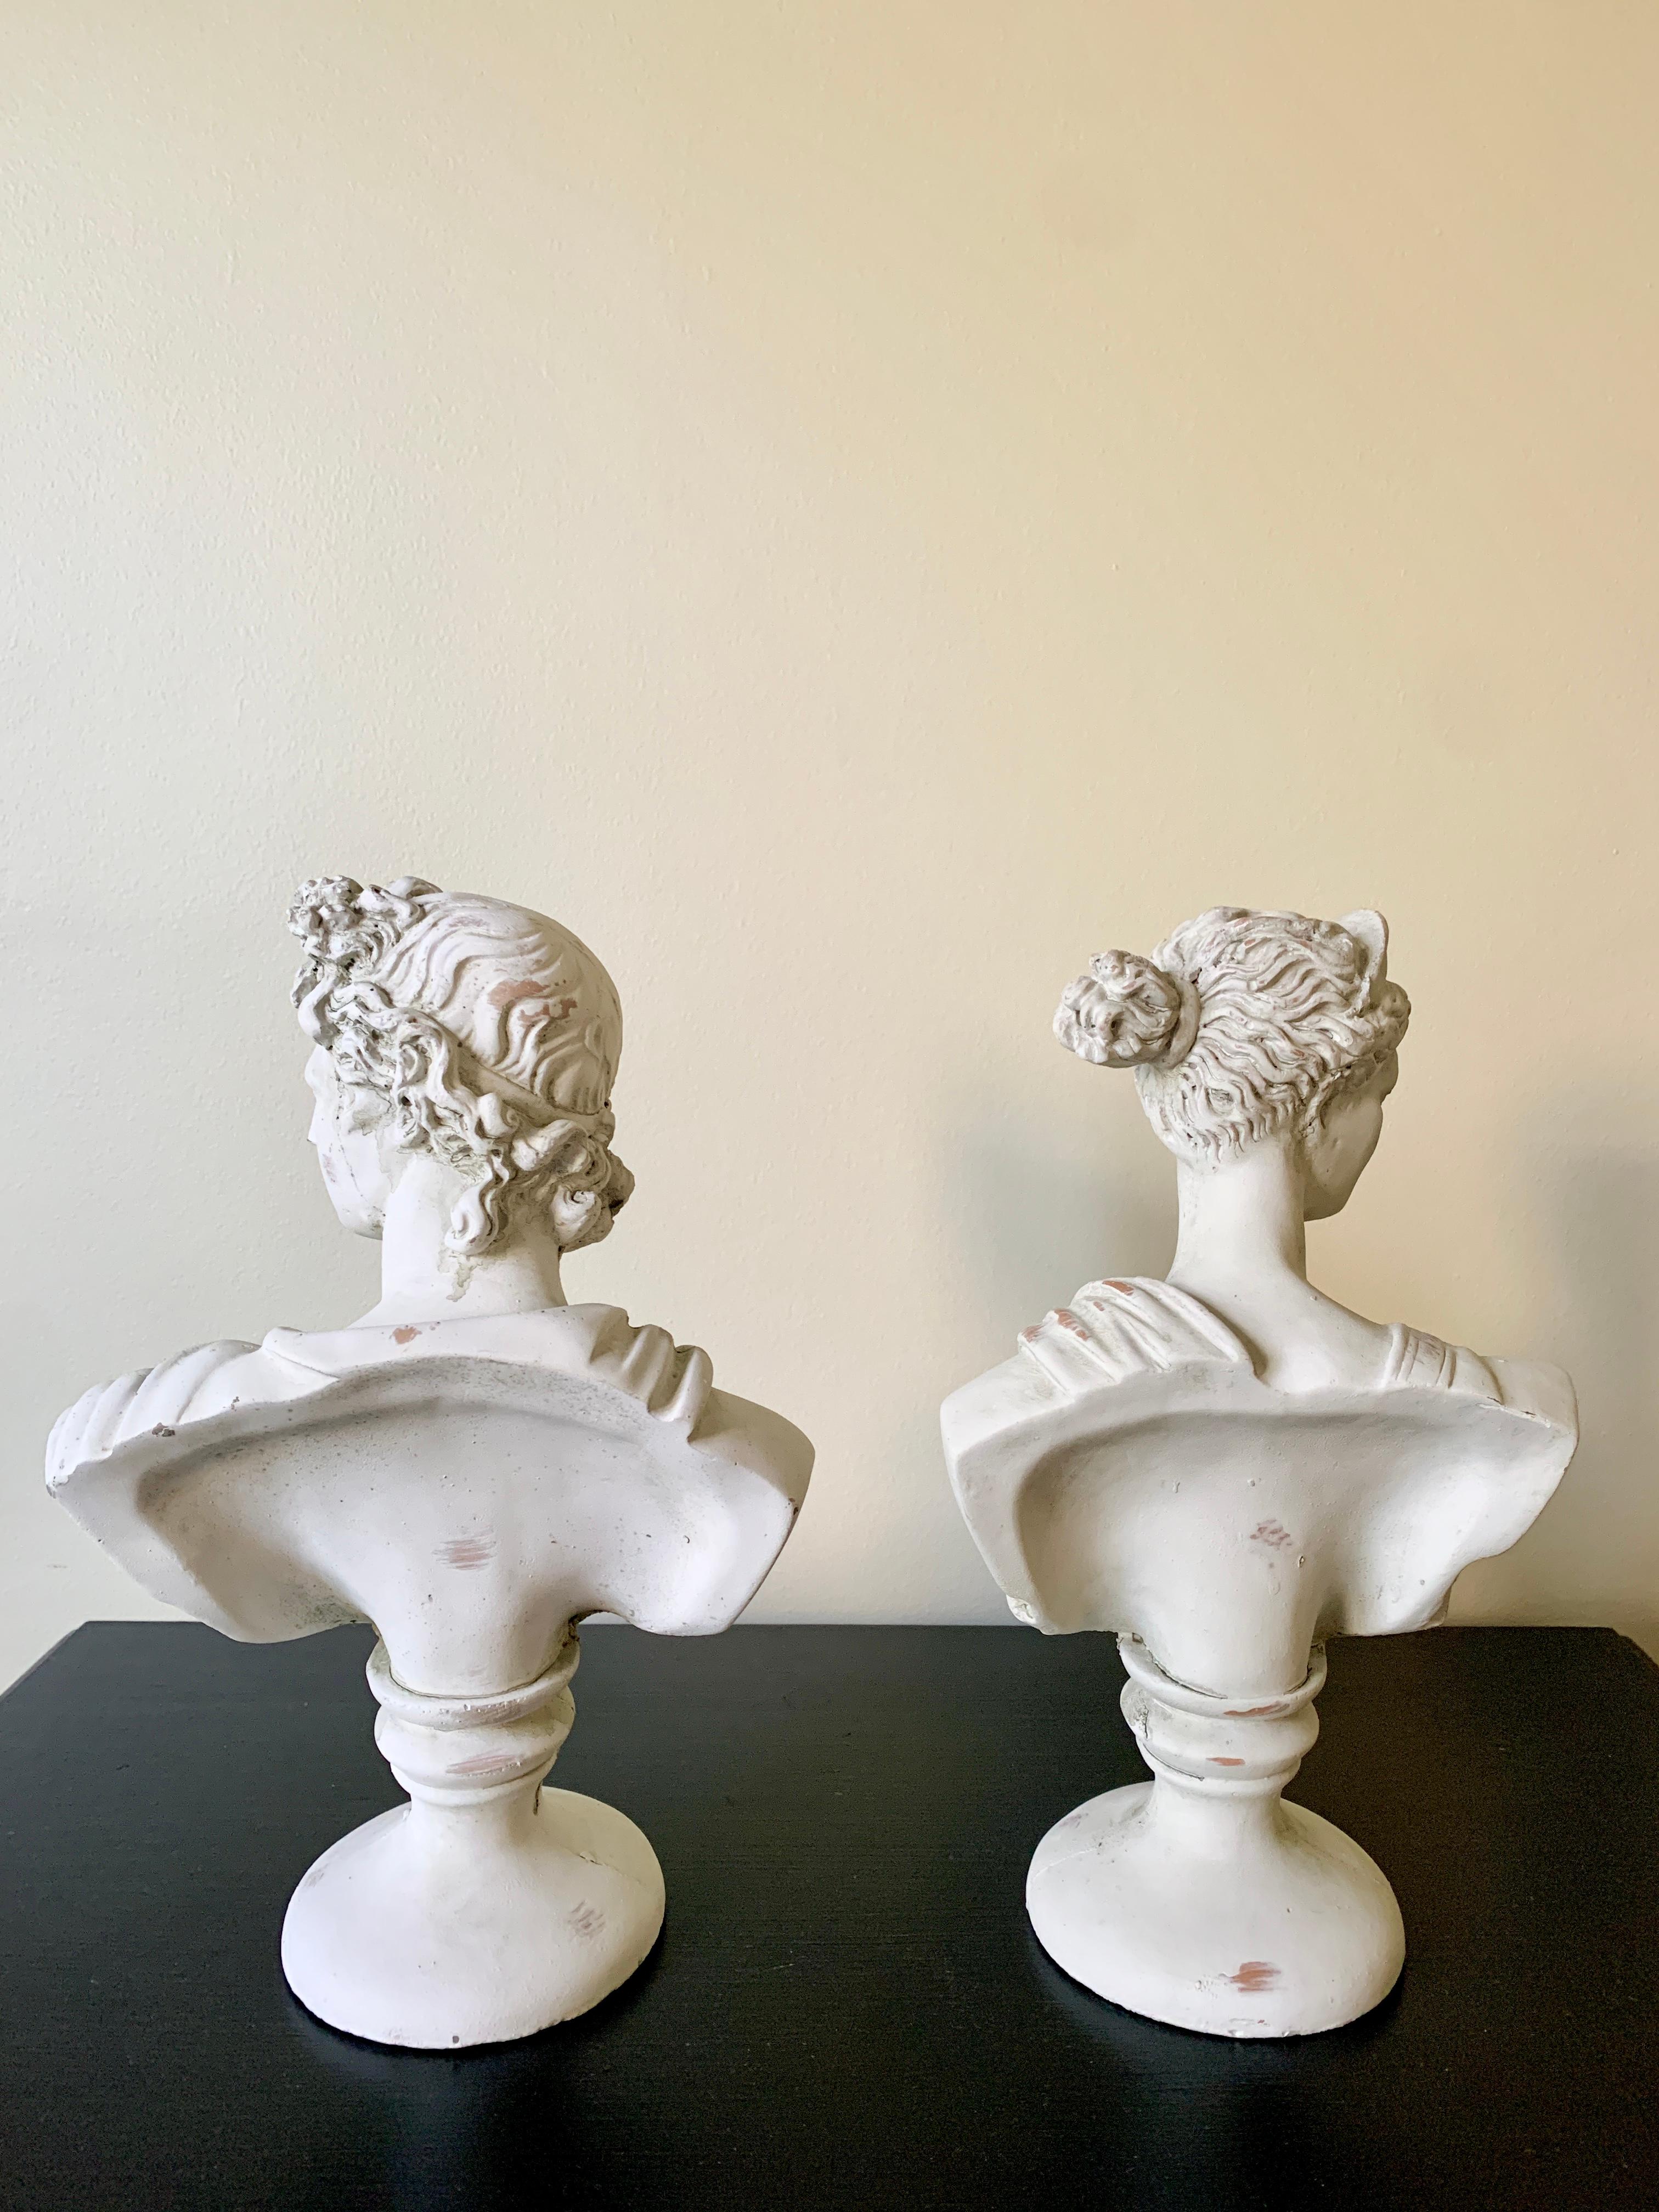 Neoclassical Plaster Busts of Diana and Apollo Belvedere Sculptures, Pair For Sale 1